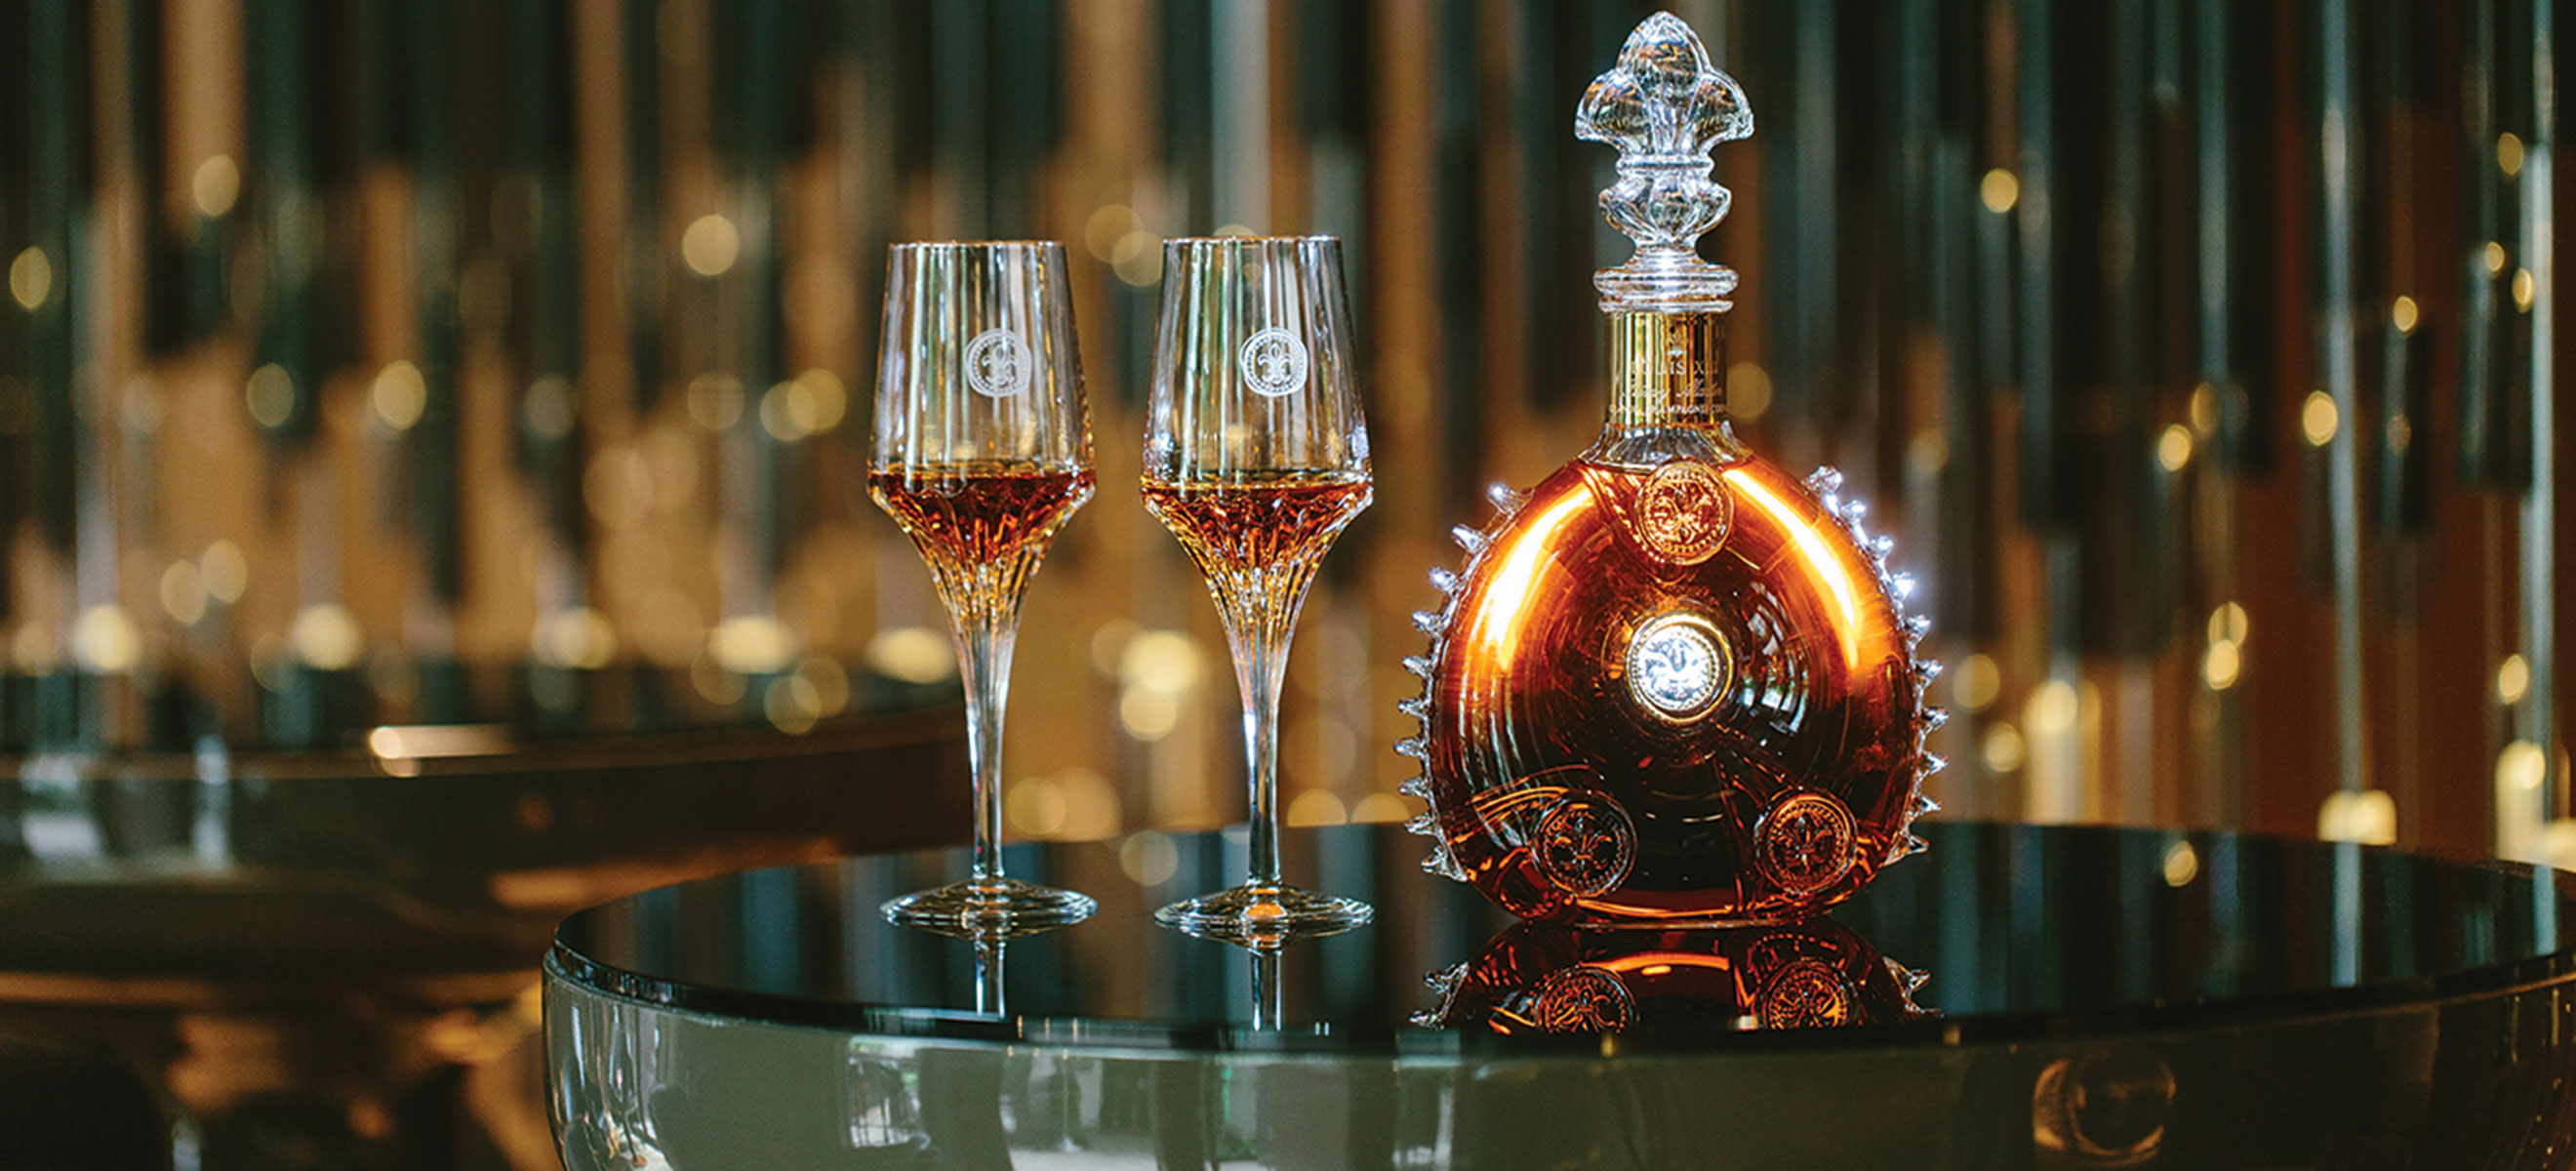 The Louis XIII Experience